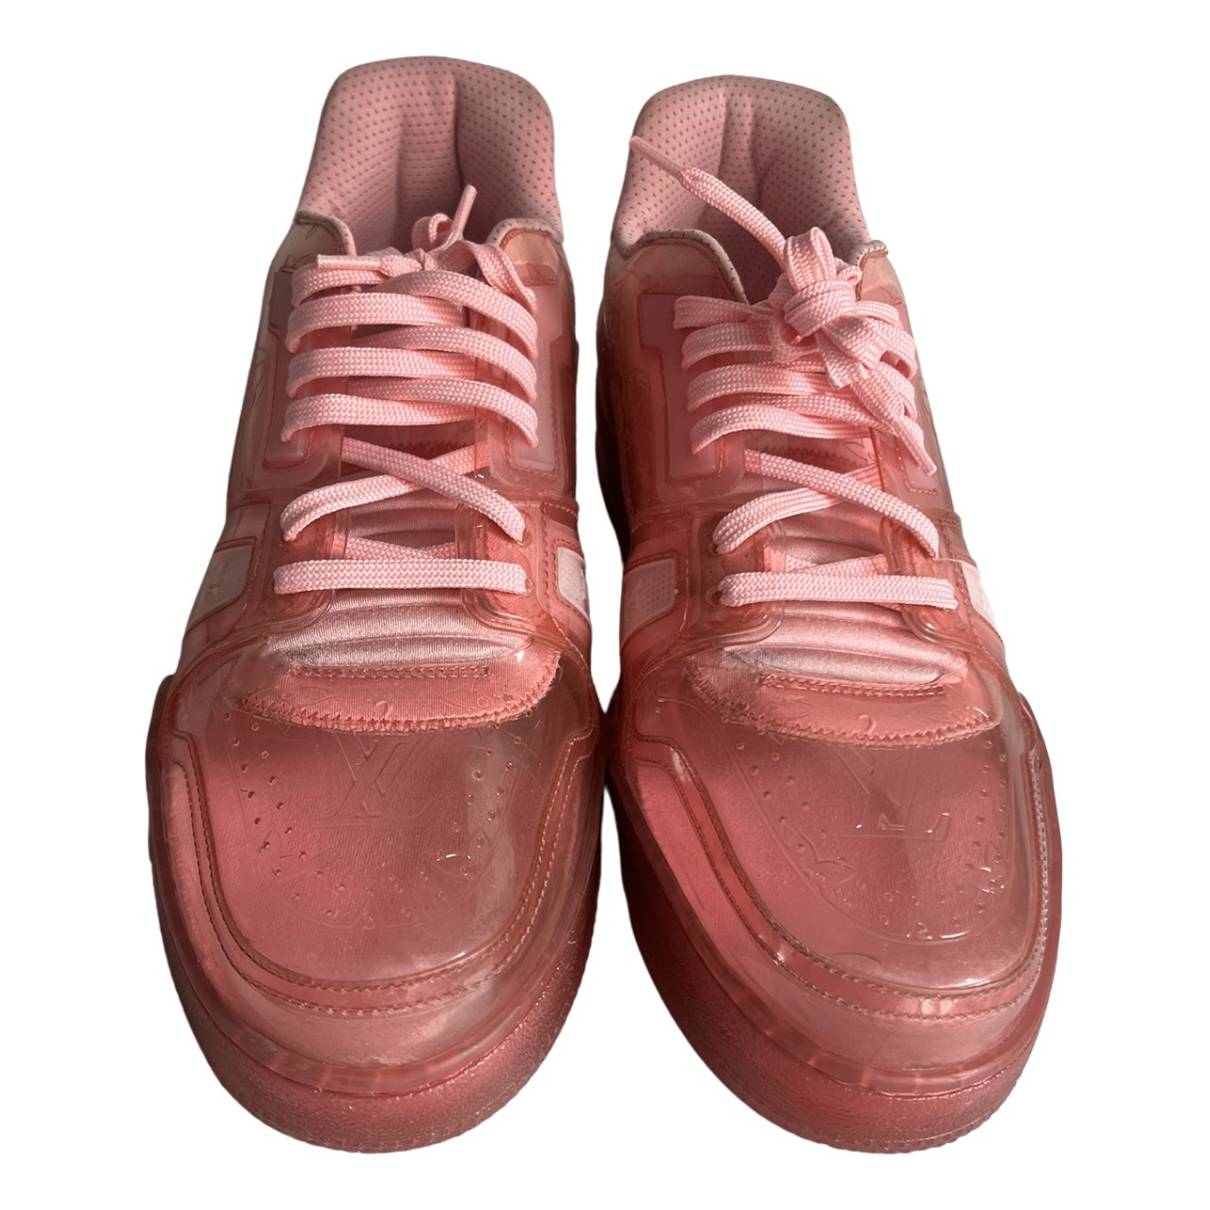 Lv trainer low trainers Louis Vuitton Pink size 9 UK in Plastic